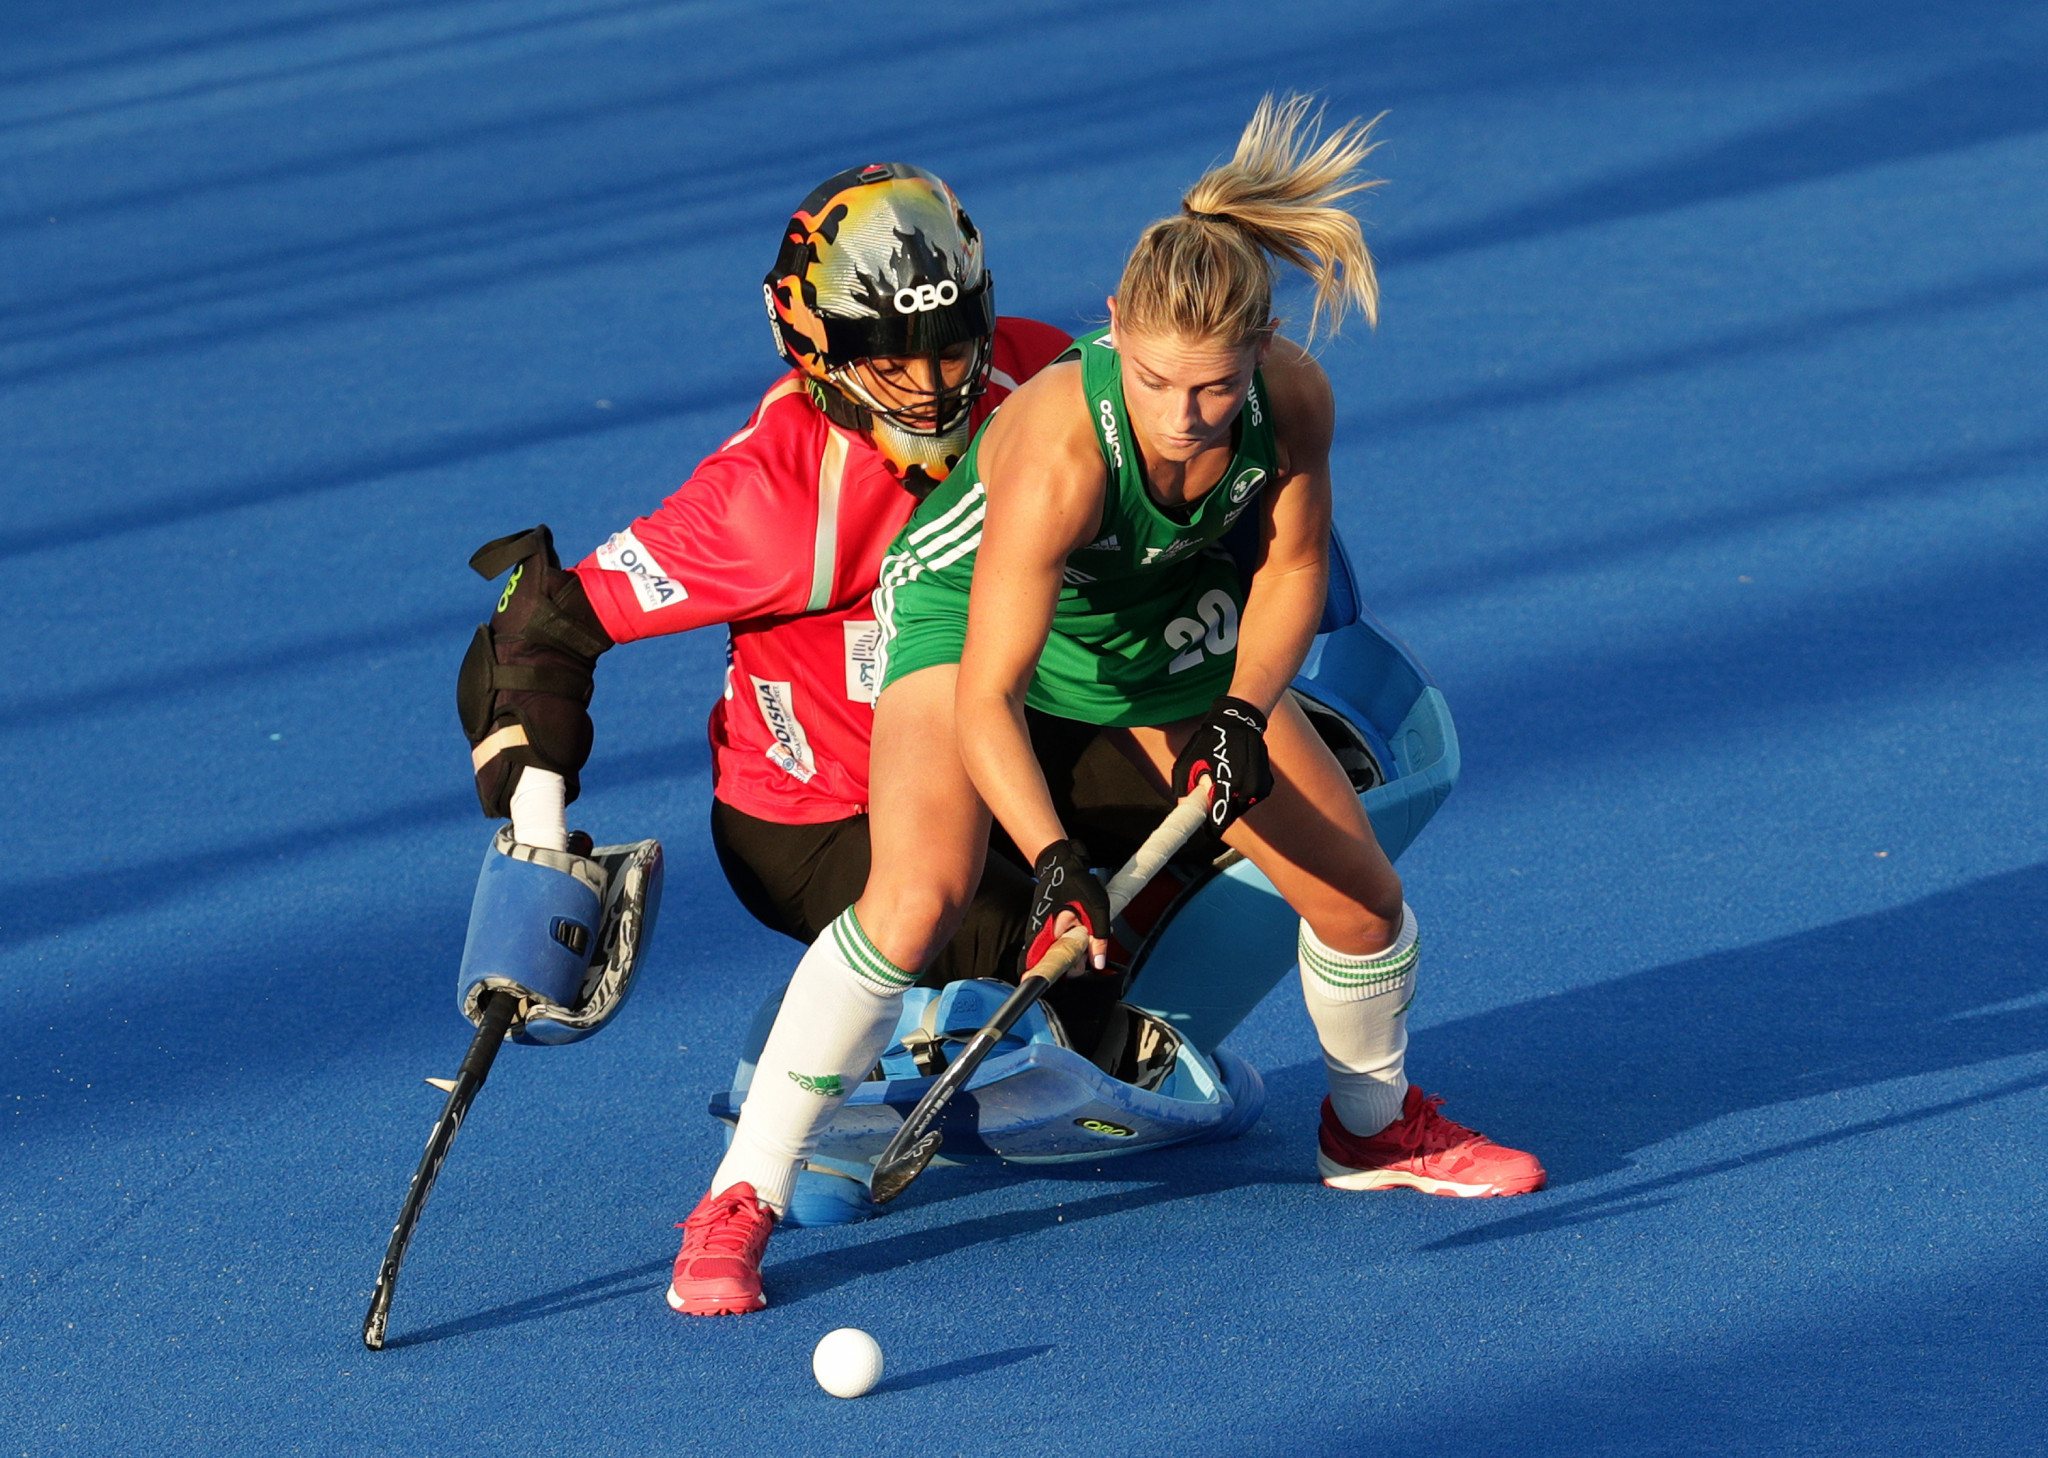 Ireland's hockey teams are enjoying unprecedented success at the moment and its women's team reached the final of the FIH World Cup in London last year ©Getty Images